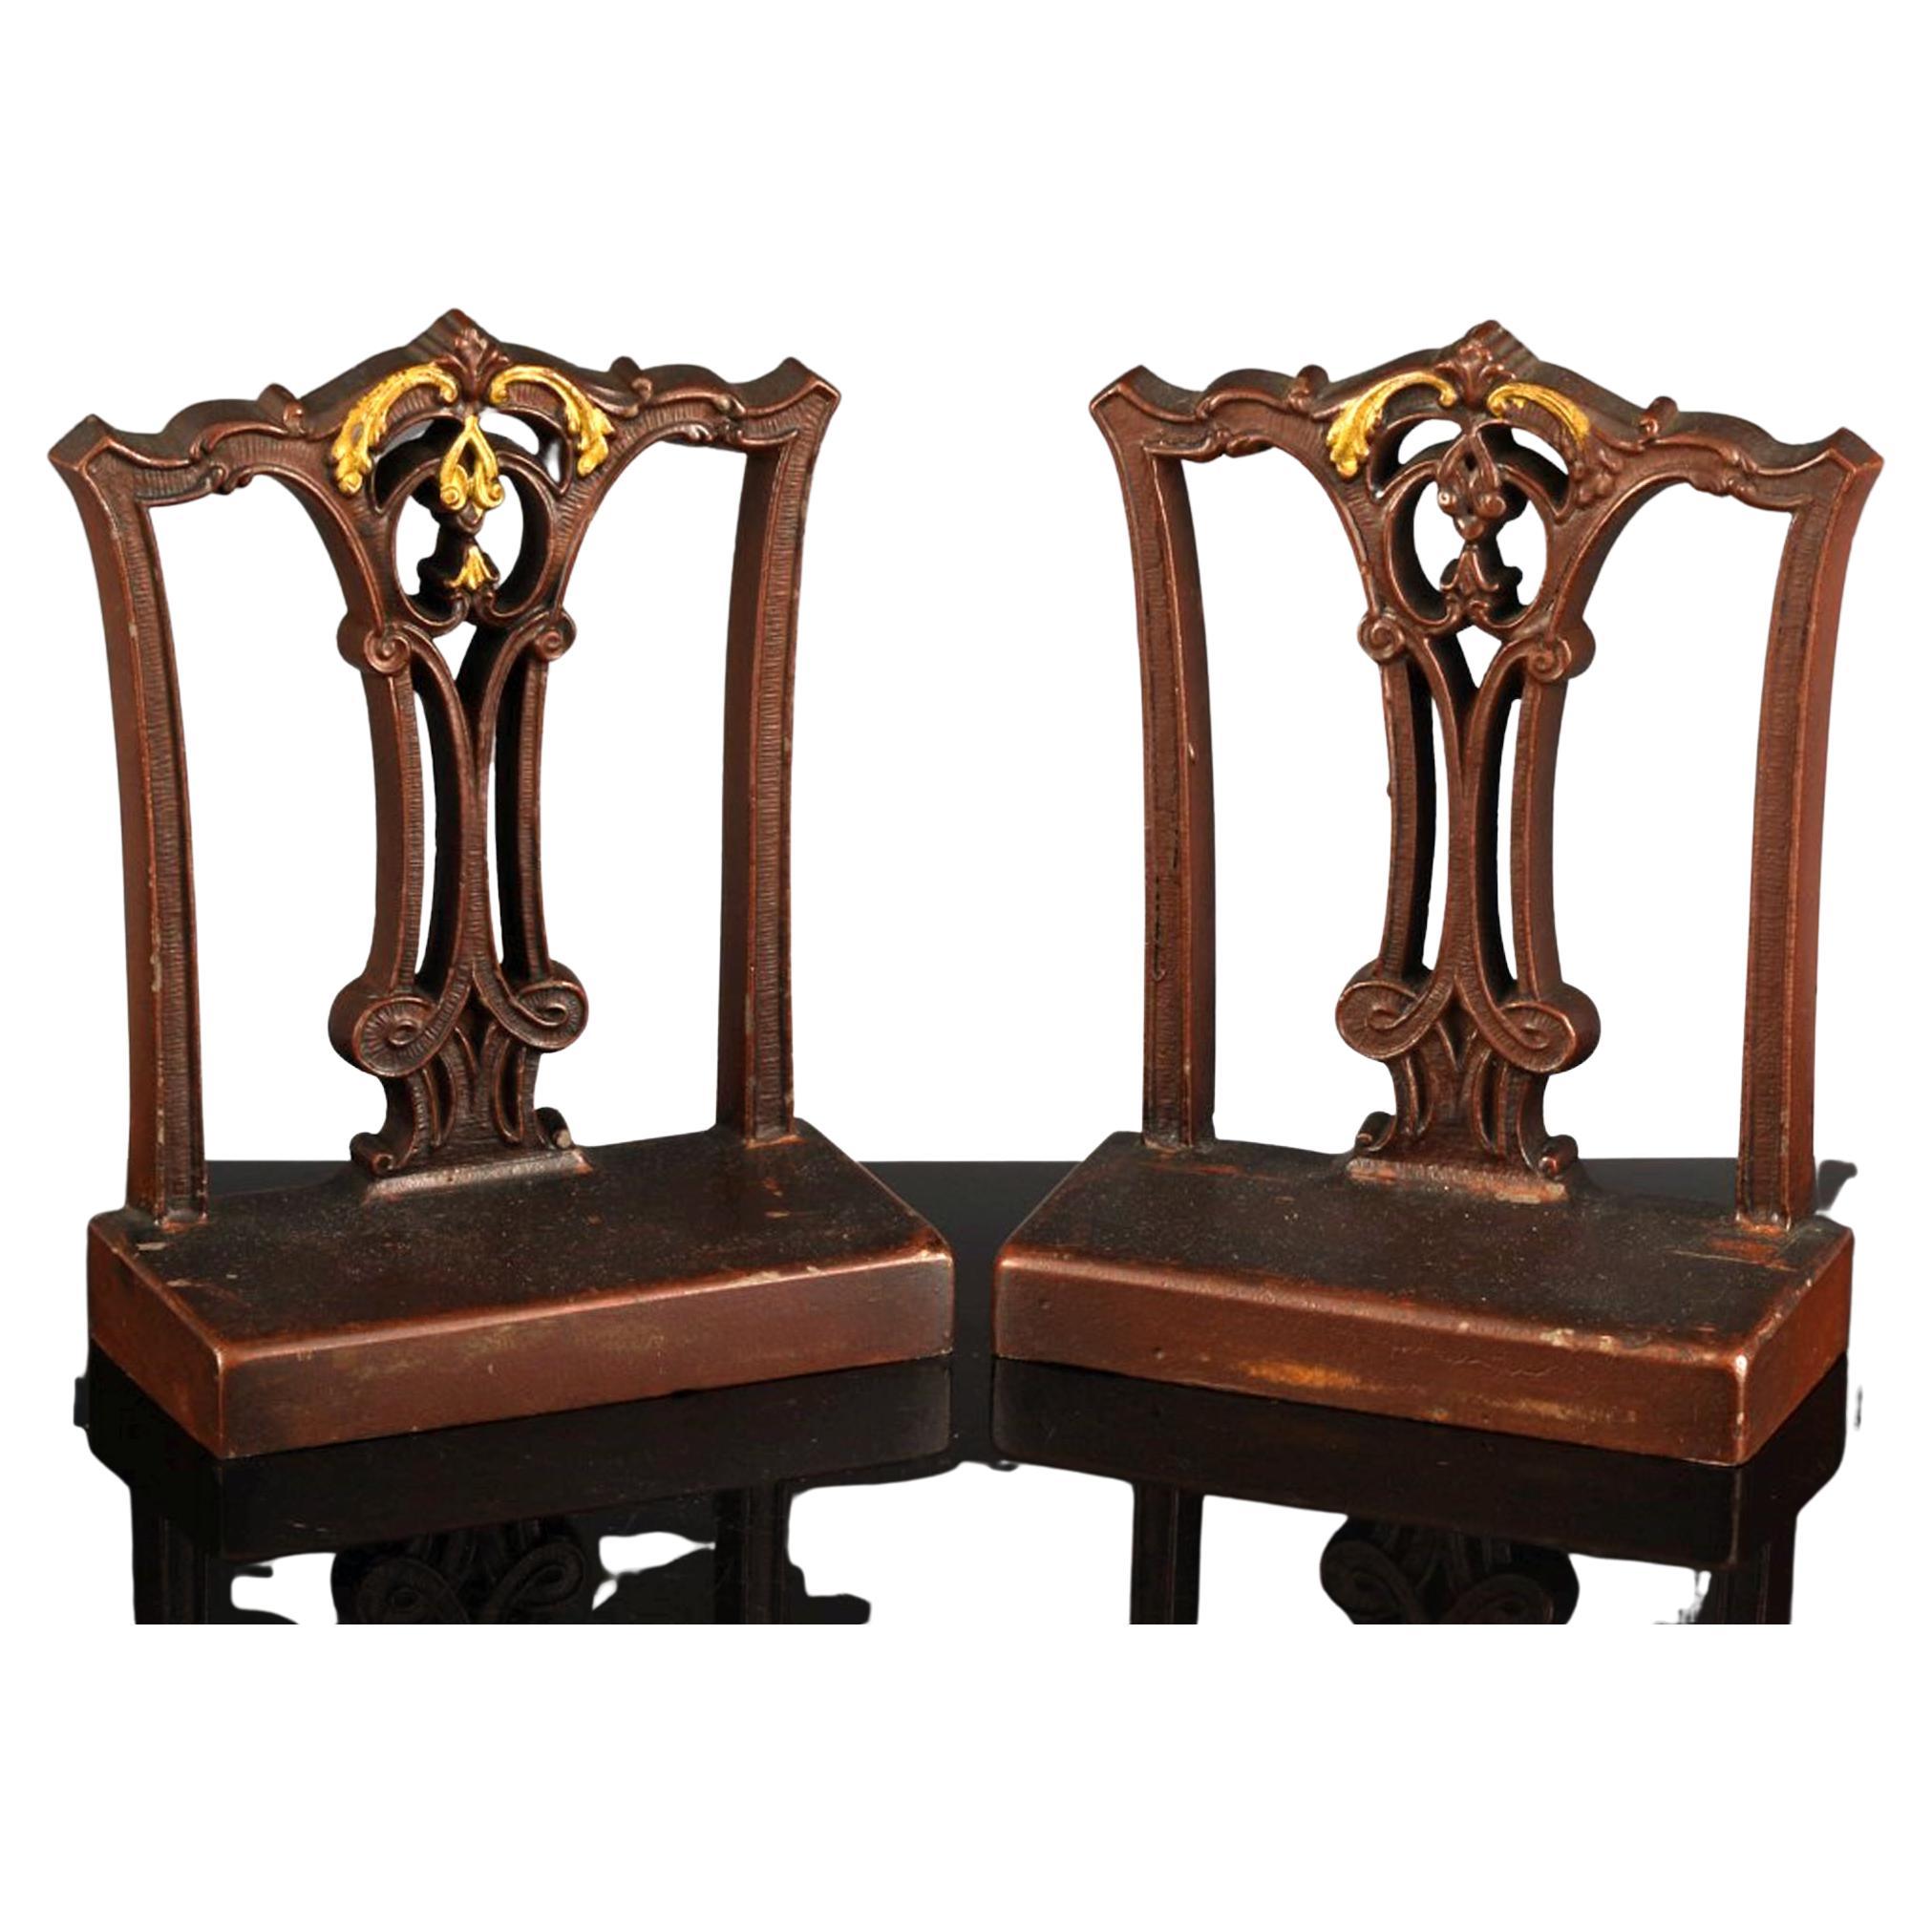 American Bookends in the form of a Chippendale Chair Back,
Bradley & Hubbard, Meriden, Connecticut
The 1920s

A pair of bookends made by Bradley & Hubbard in the first quarter of the 20th century. The bookends are made in the form of a